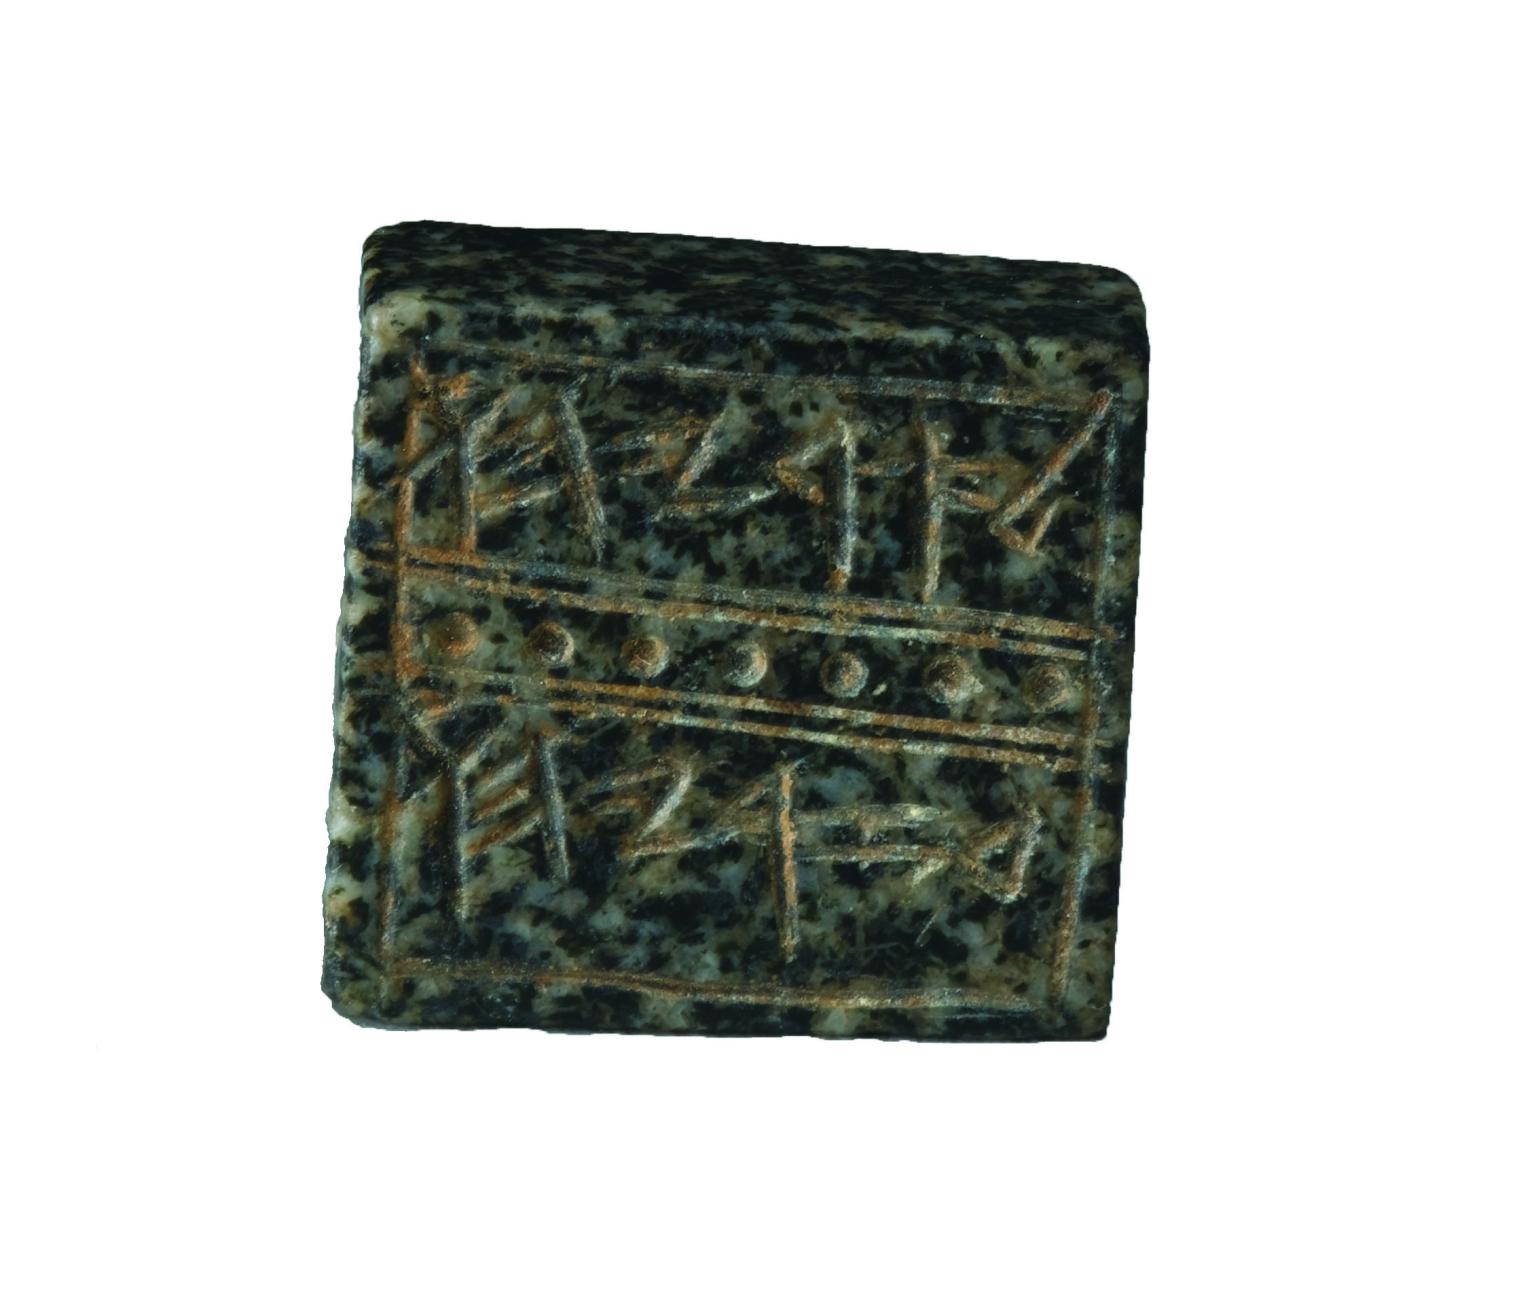 Square rock seal decorated with lines and dots that surround a Hebrew inscription.